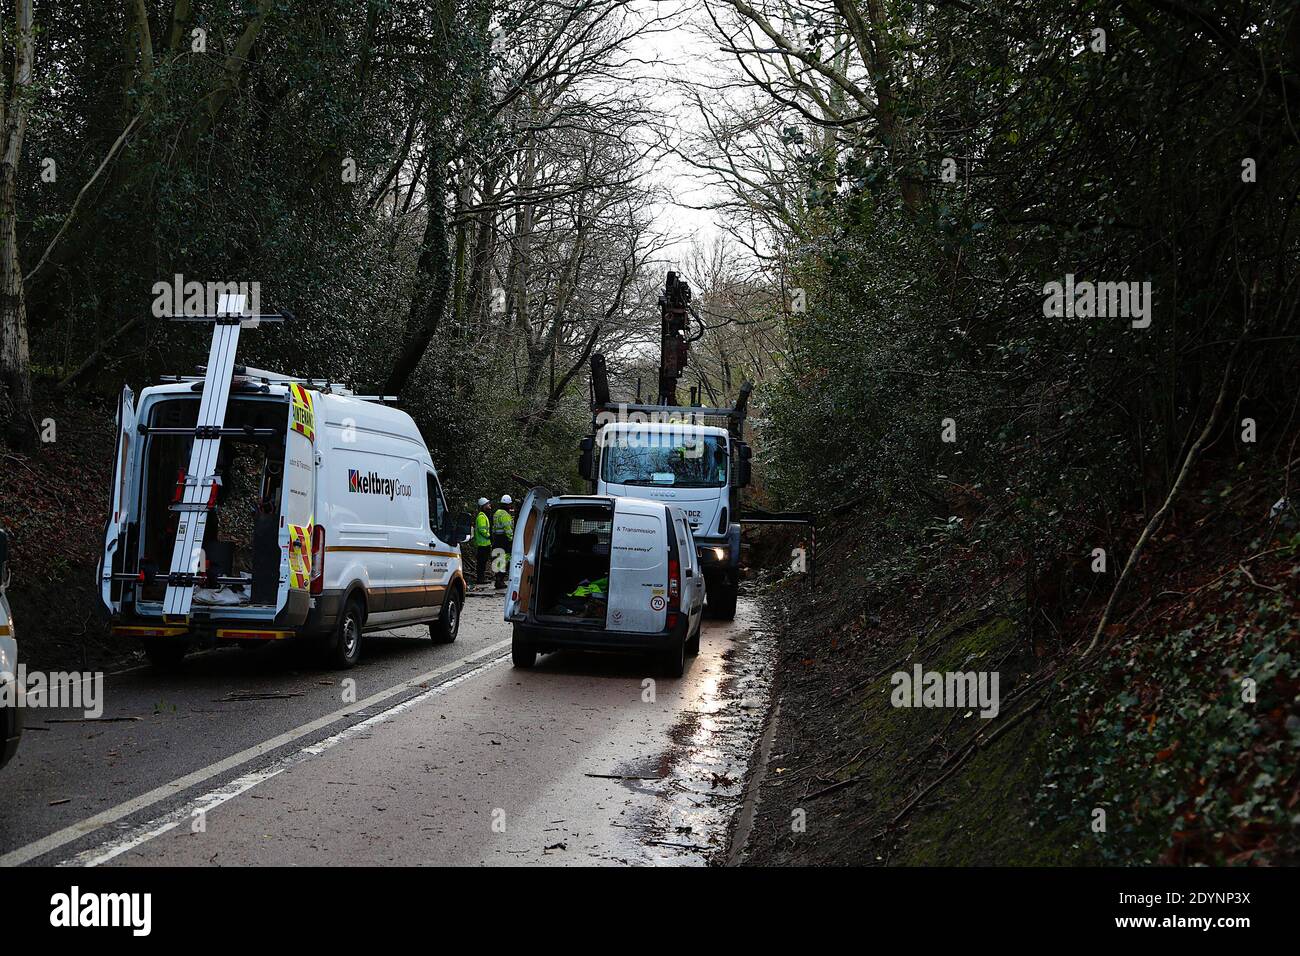 Hastings, East Sussex, UK. 27 Dec, 2020. UK Weather: The A21 from Hastings to Sedlescombe is blocked off by the police as storm Bella has blown down trees along the route. Trees have taken Power line down, according workmen they have several hours left to clear the road. Photo Credit: Paul Lawrenson/Alamy Live News Stock Photo